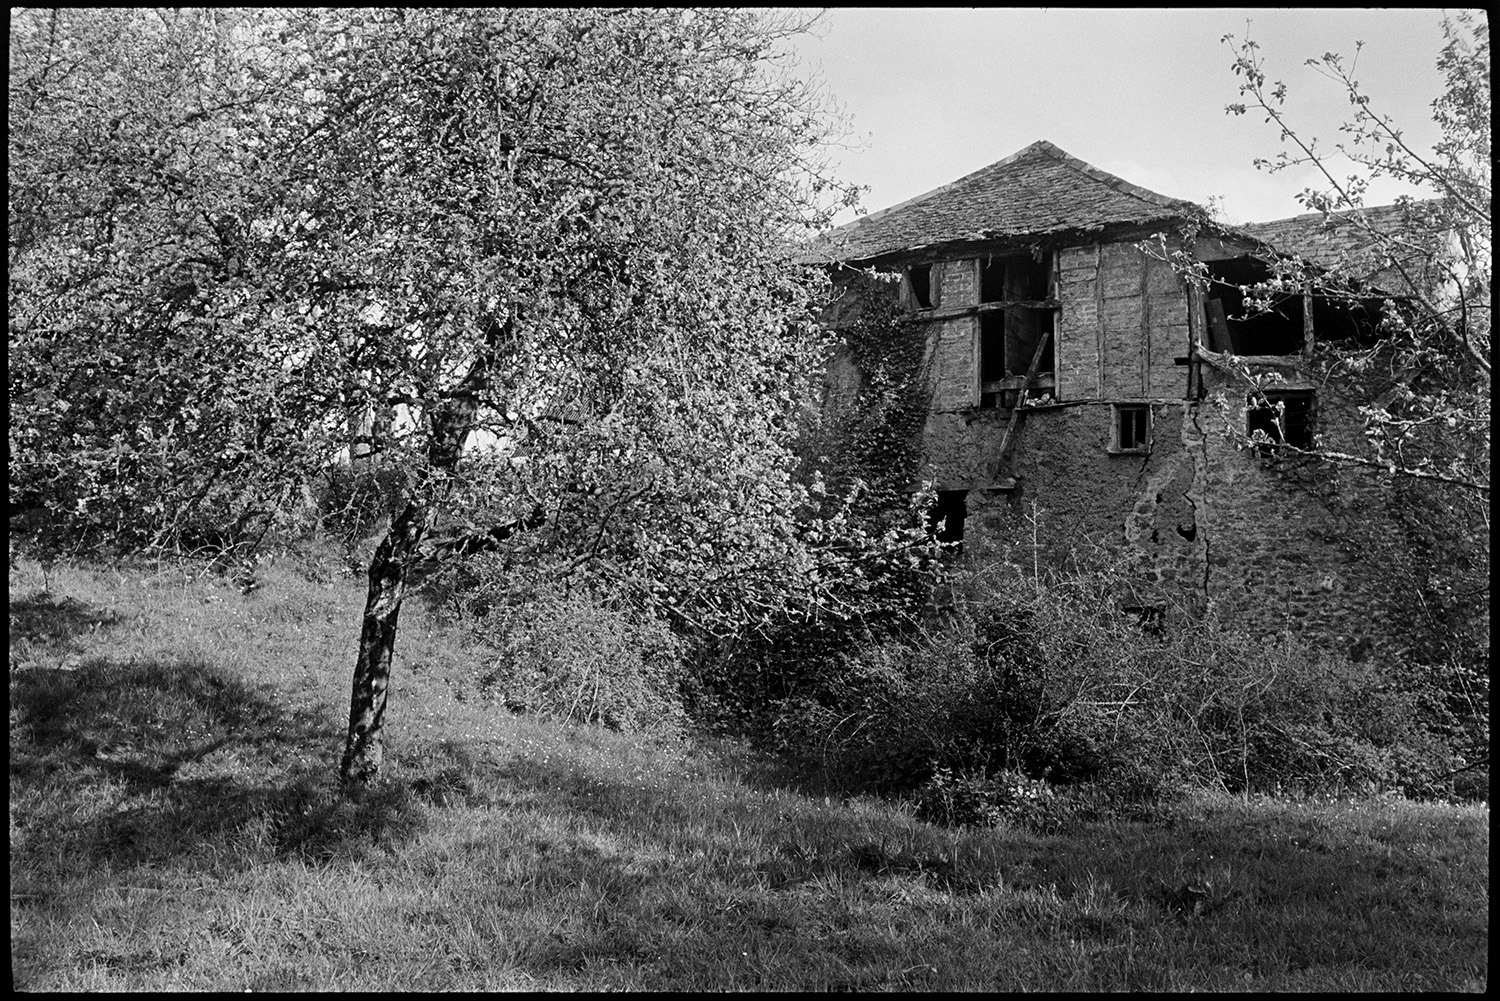 Old ruined mill and orchard. 
[A collapsing brick, cob and timber frame mill, in an orchard with apple trees in blossom, at Westpark, Iddesleigh.]